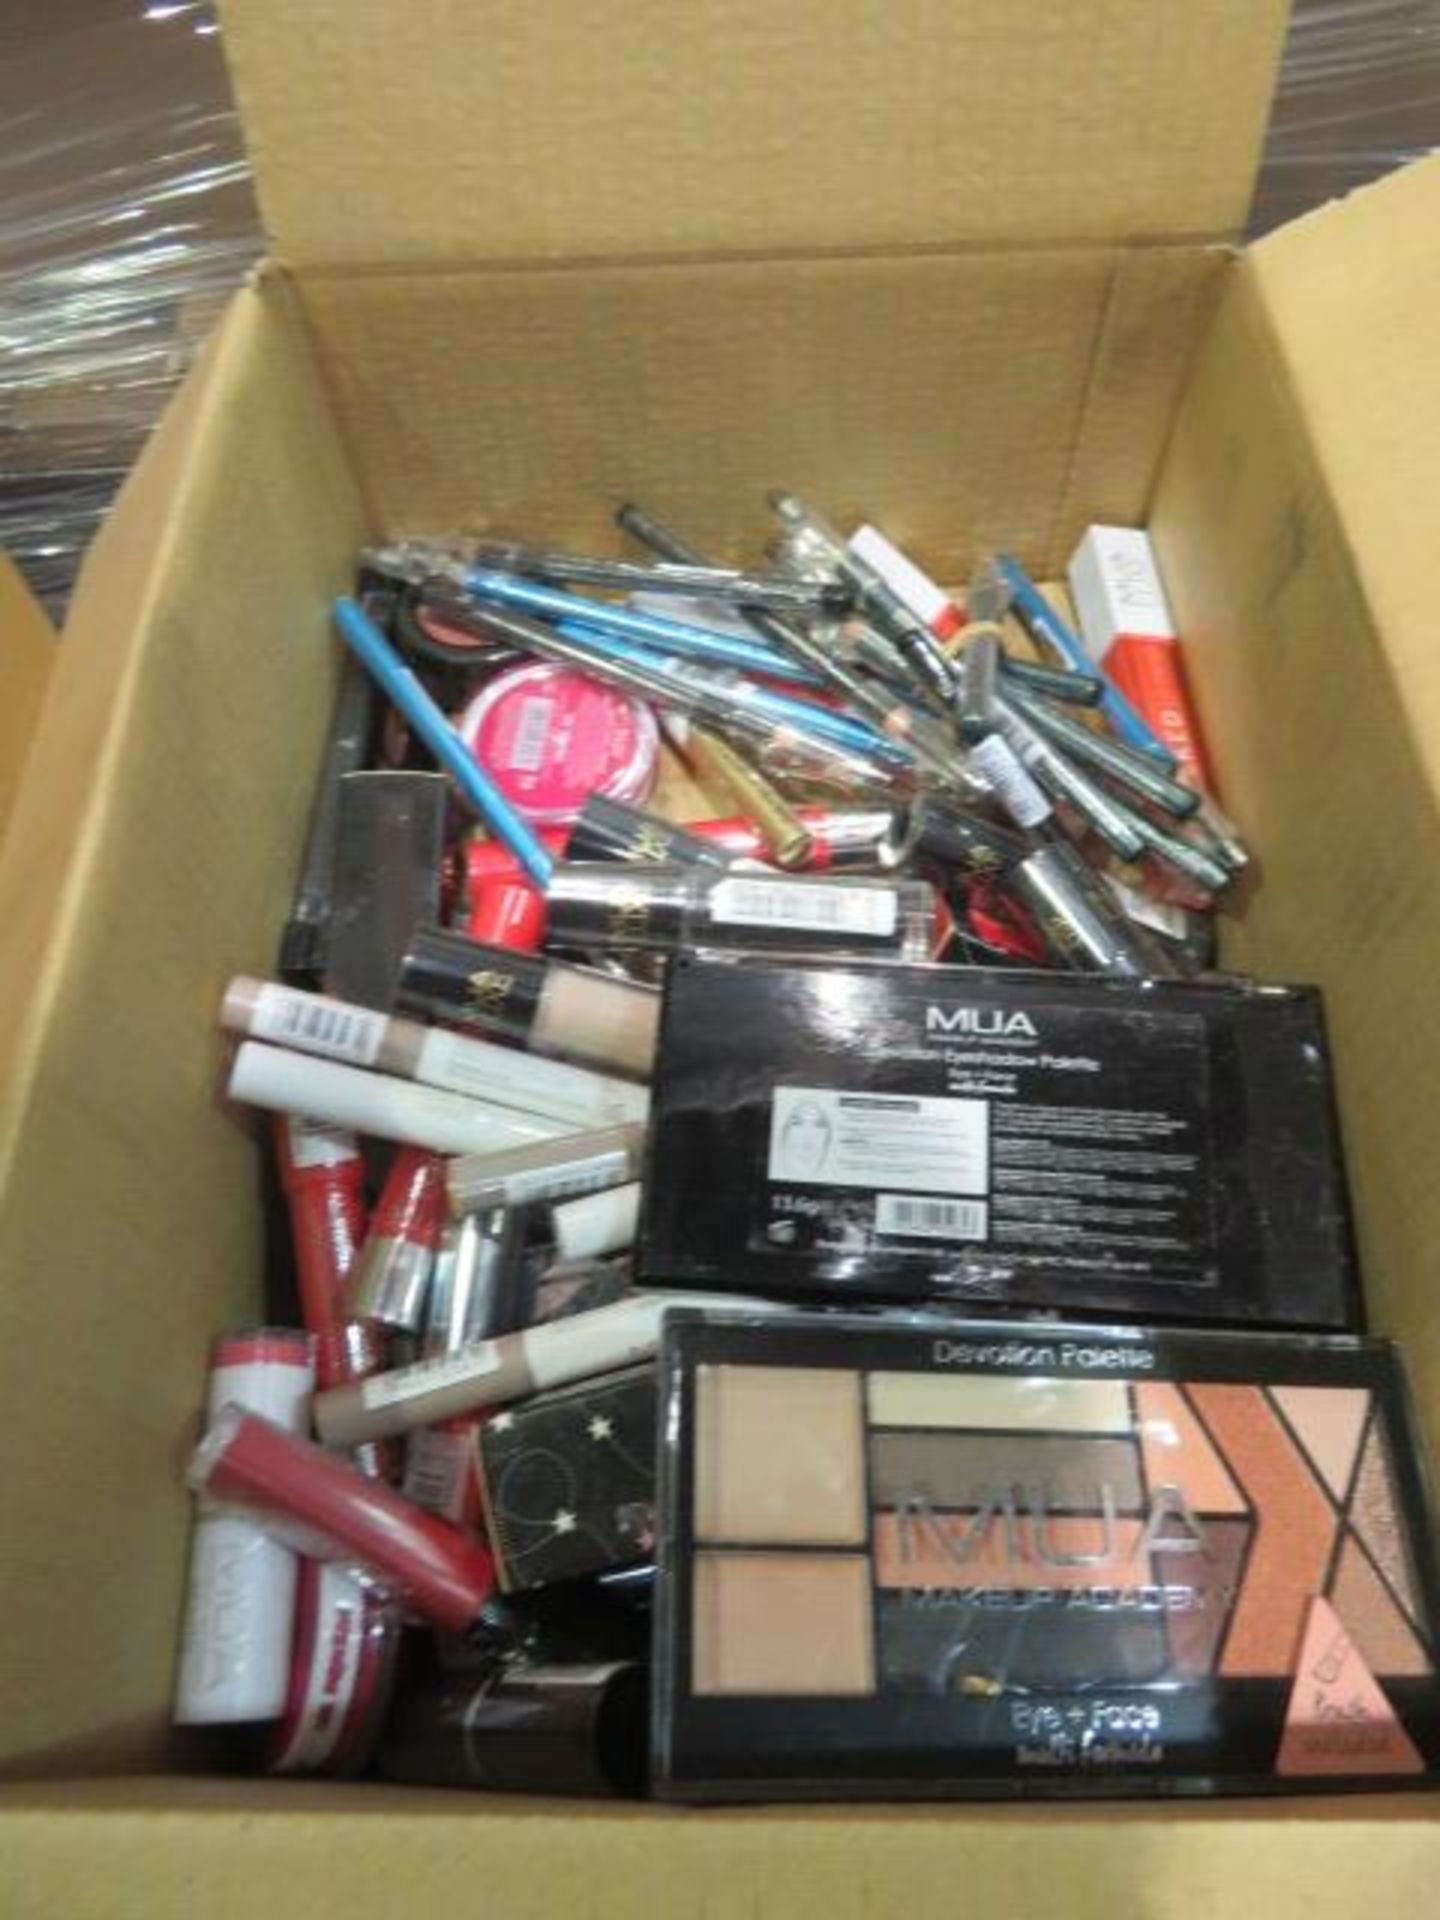 Circa. 200 items of various new make up acadamy make up to include: devolution eyeshadow palette,